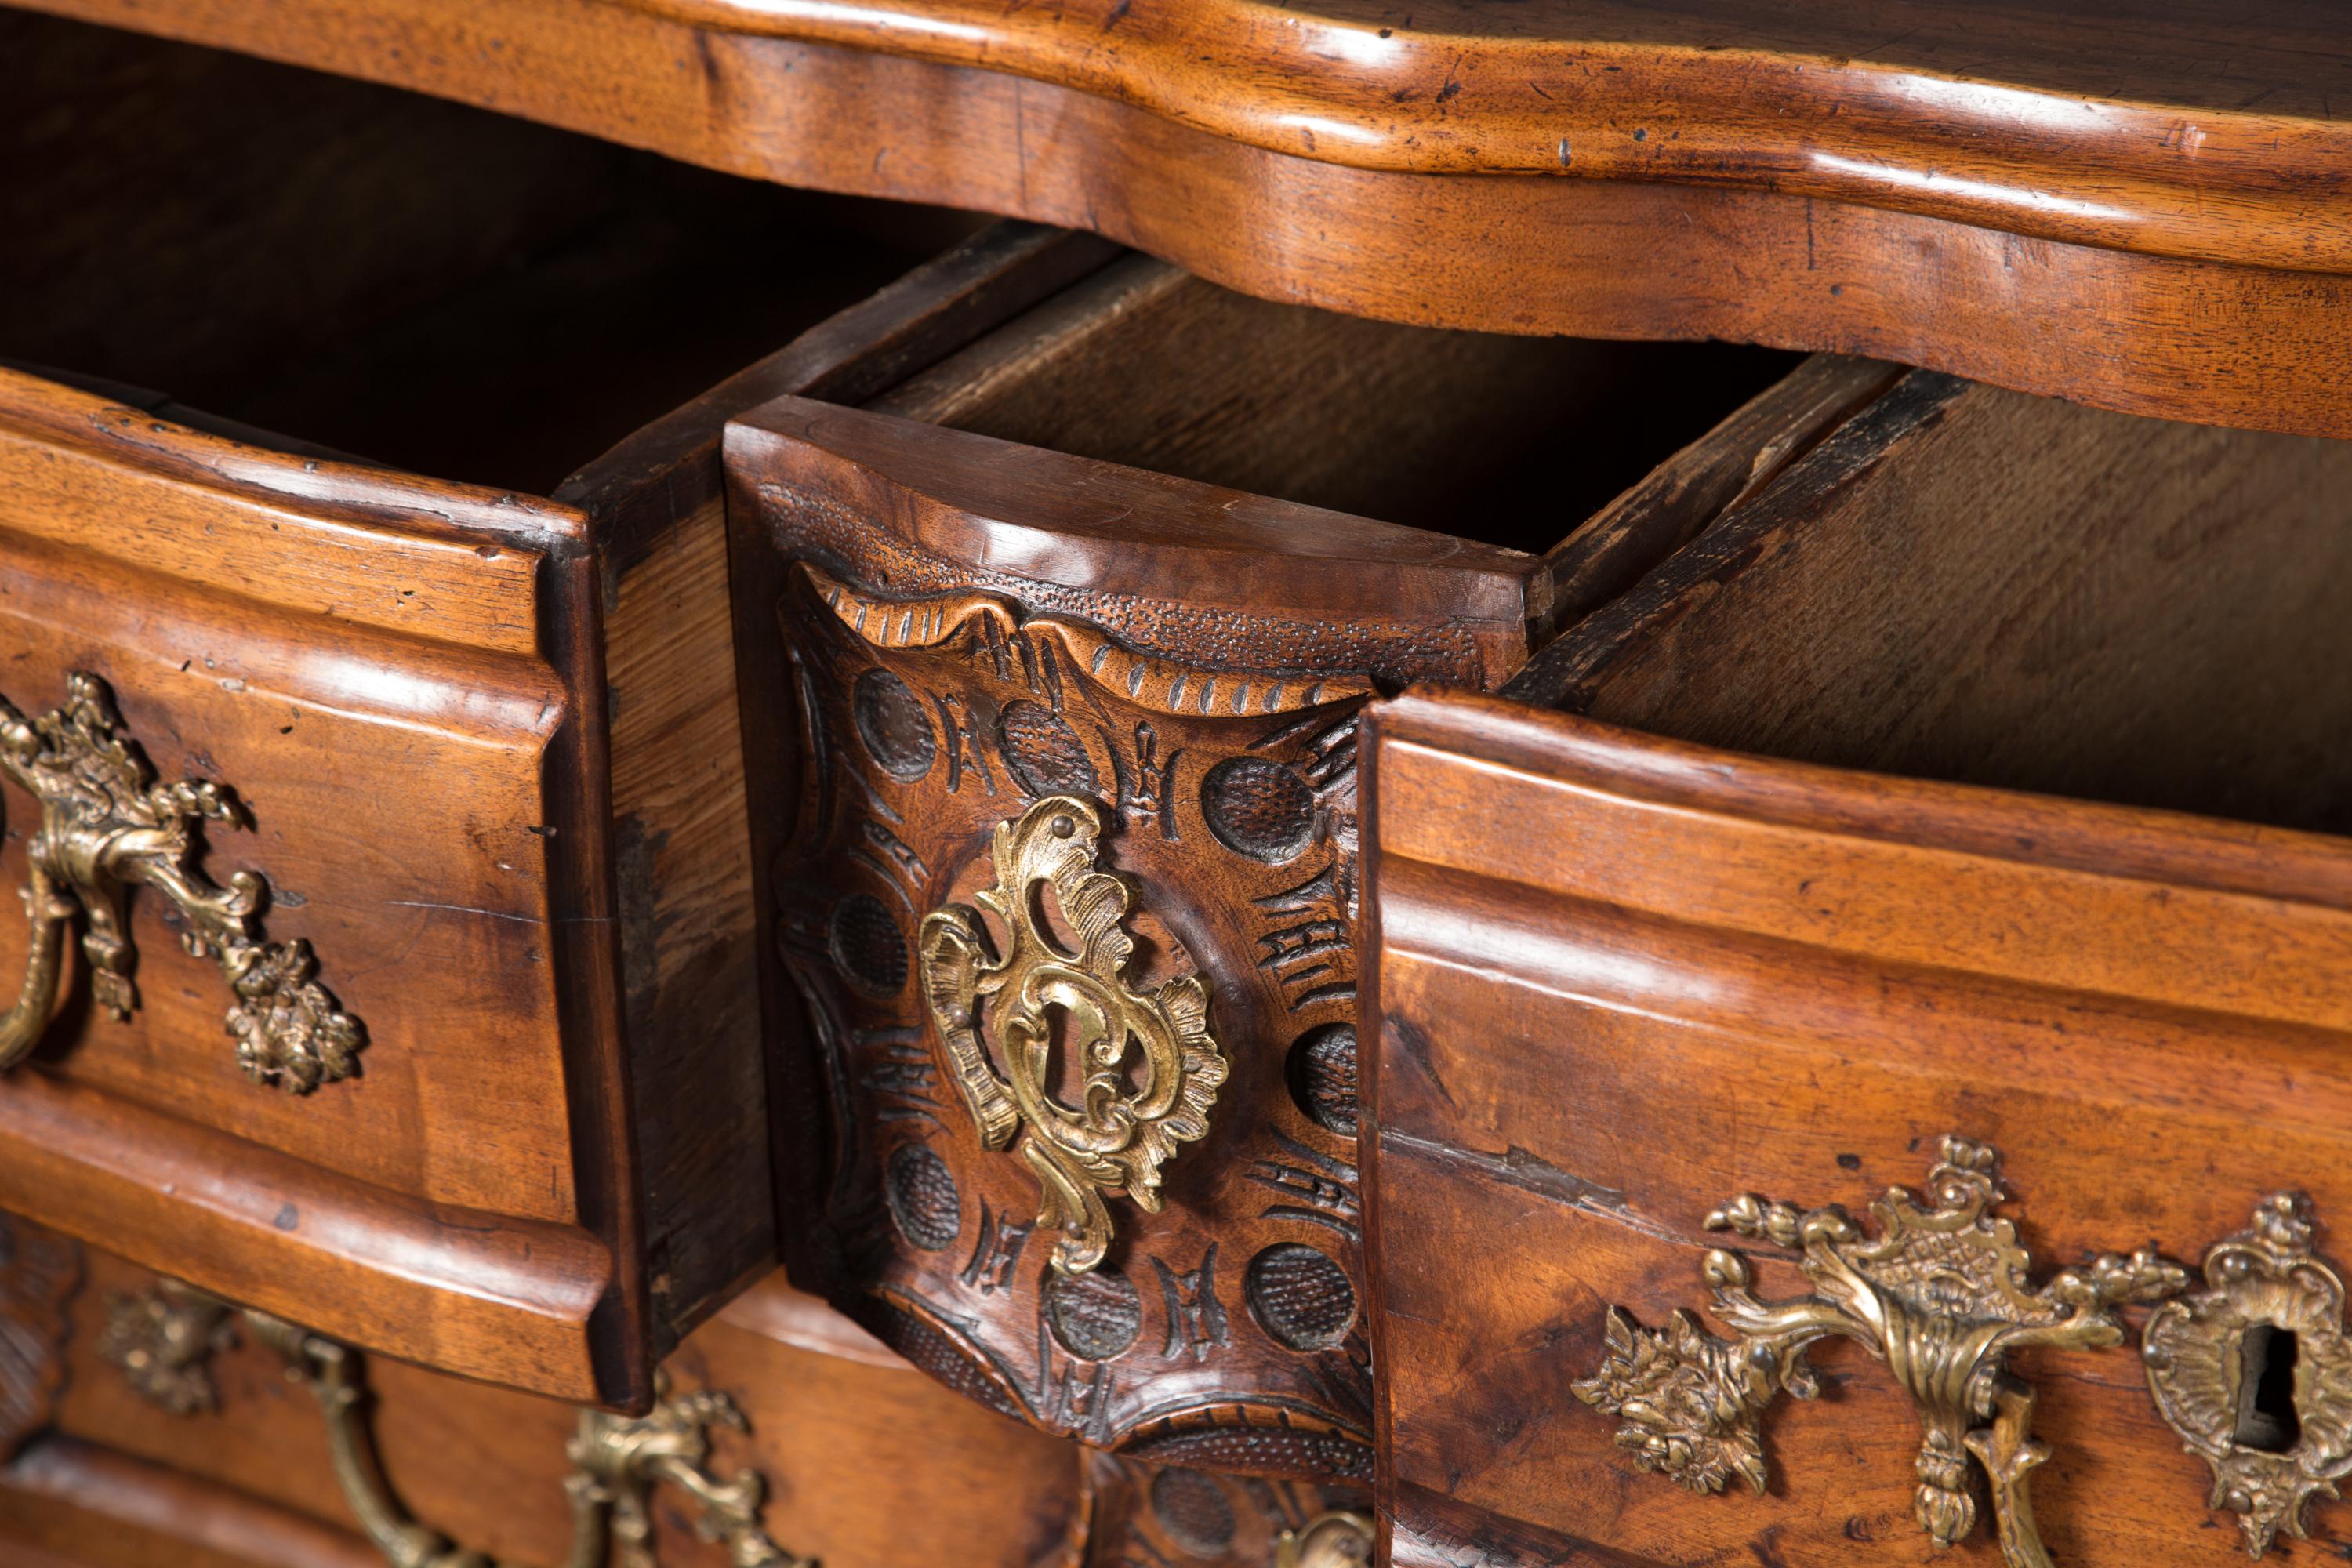 Early 18th Century Regence Period Lyonnaise Walnut Commode / Chest of Drawers In Excellent Condition For Sale In New Orleans, LA